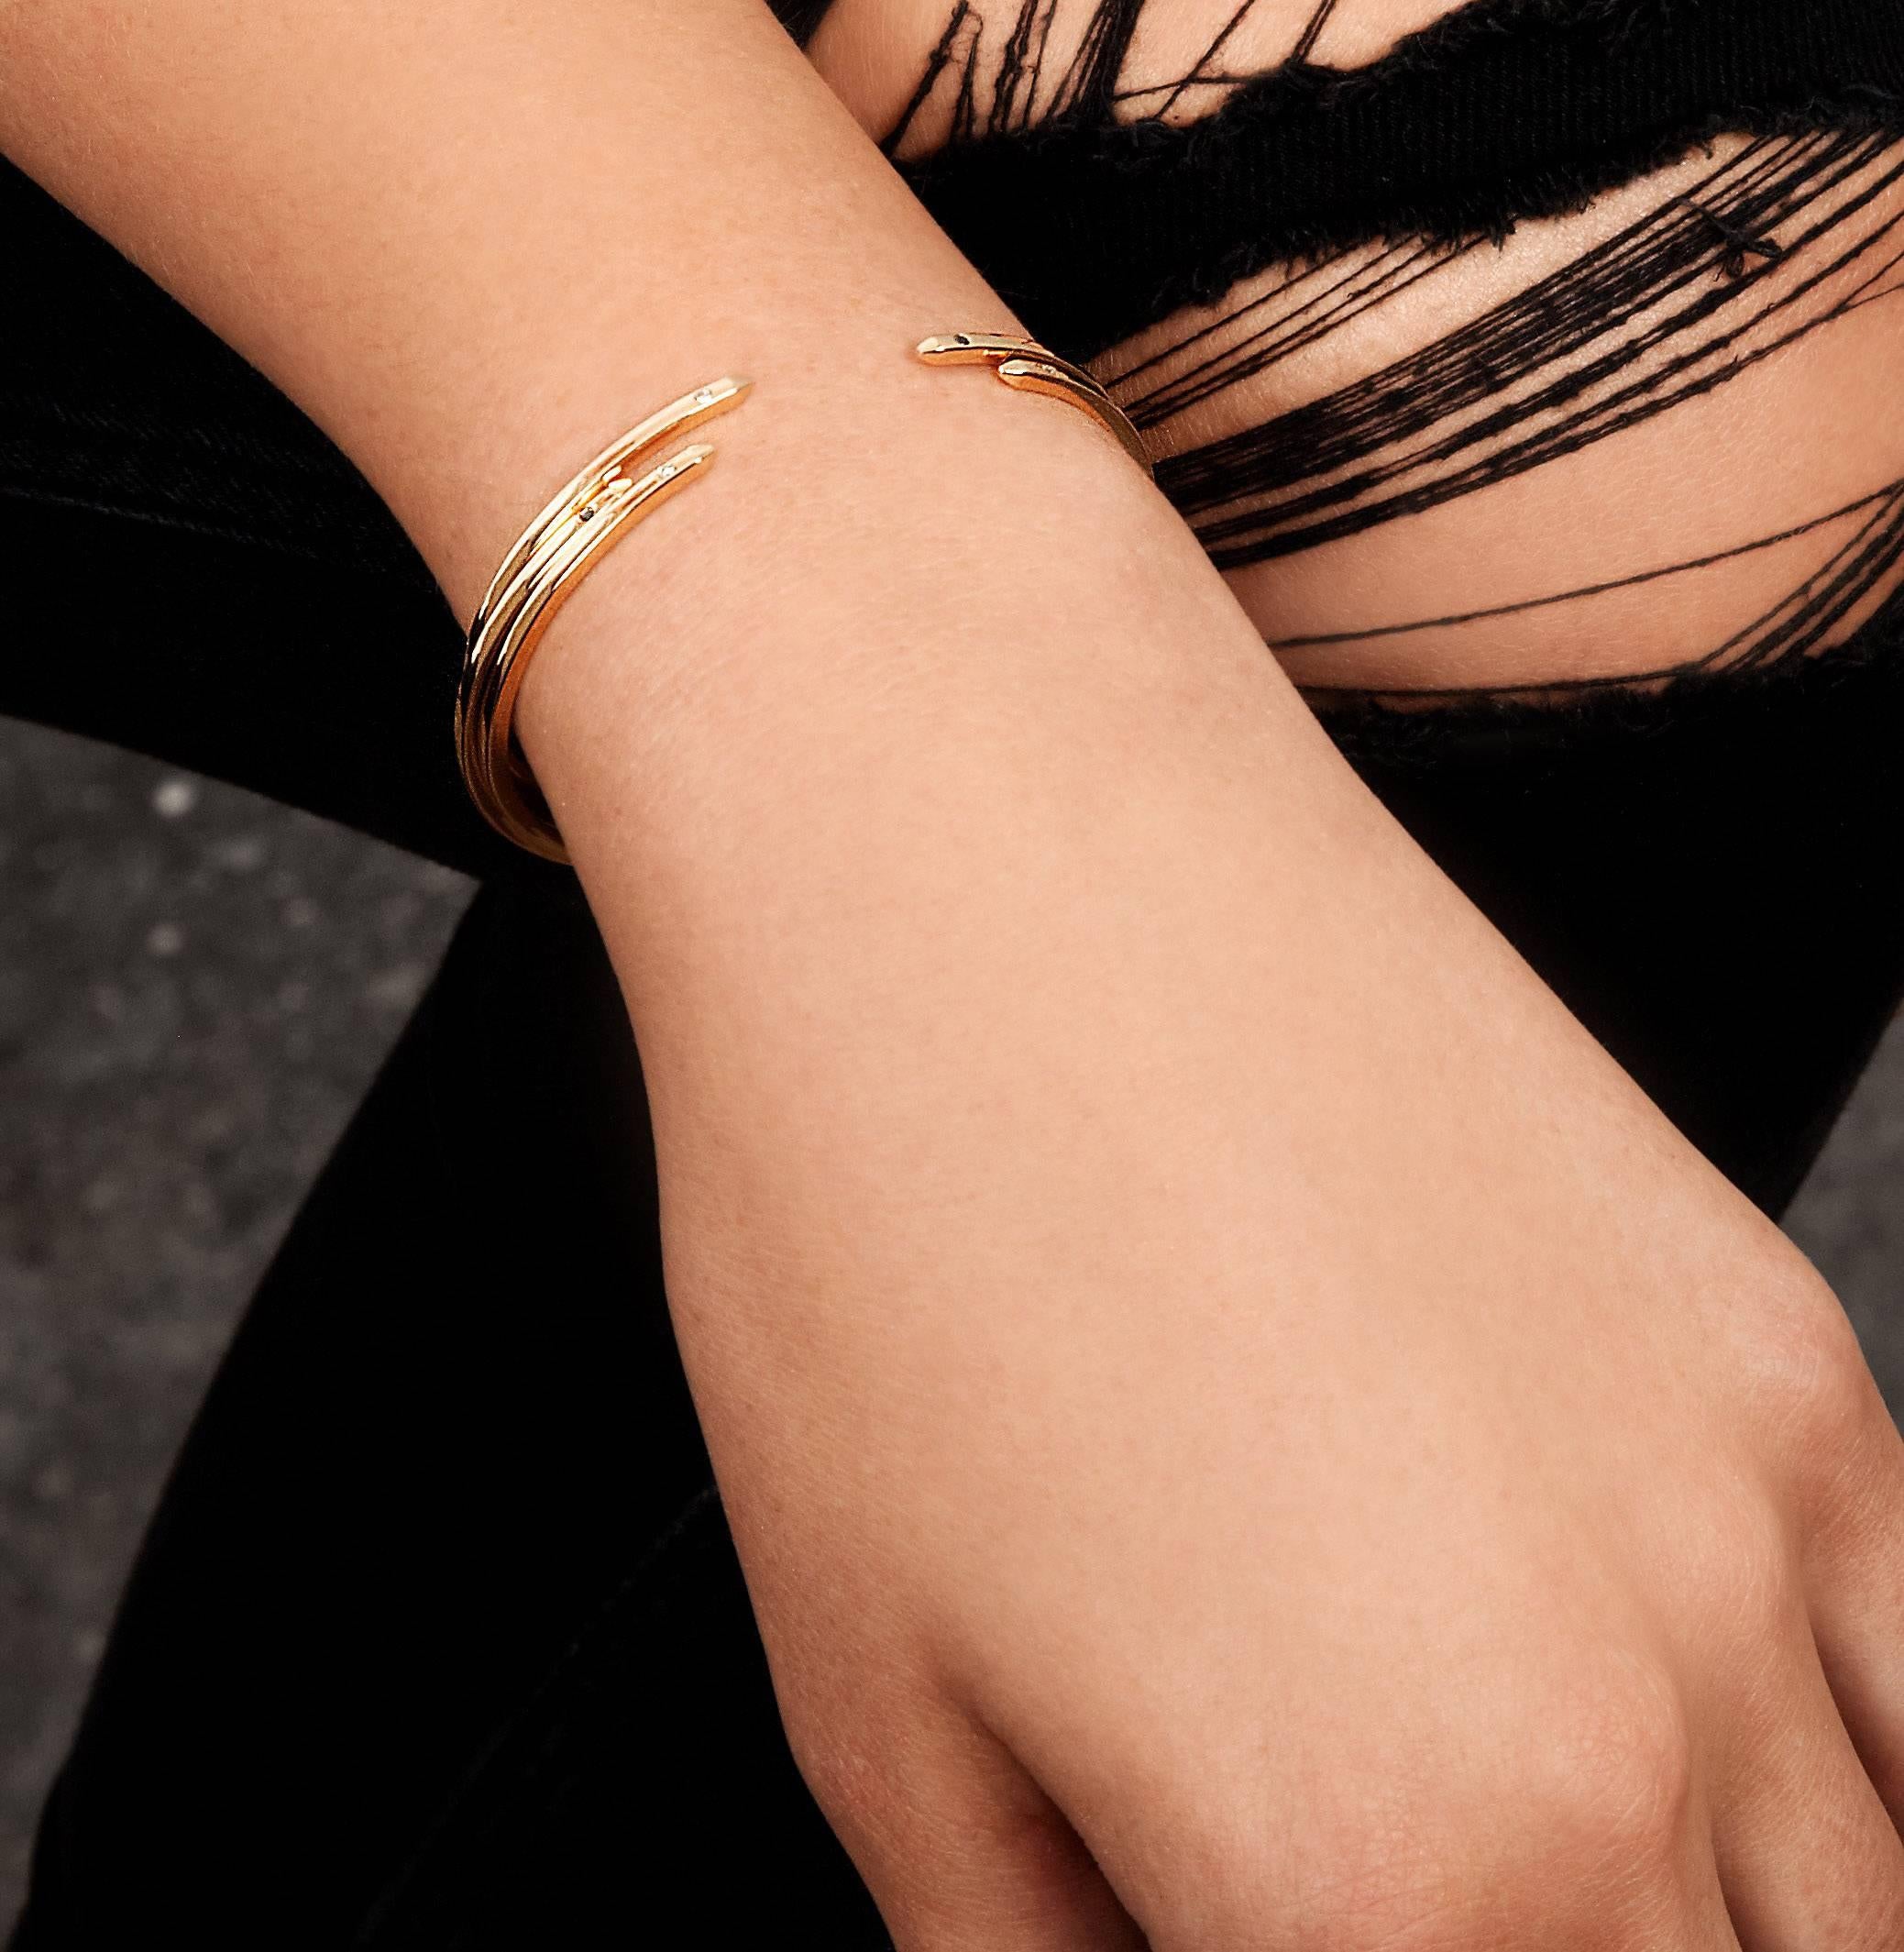 An elevated take on a jewellery basic, our 2mm-square cuff in 9-carat yellow gold has square beveled edges and two white diamonds.  Total diamond carat weight .016 carats.  The bracelet is slightly flexible to enable a customised fit for the